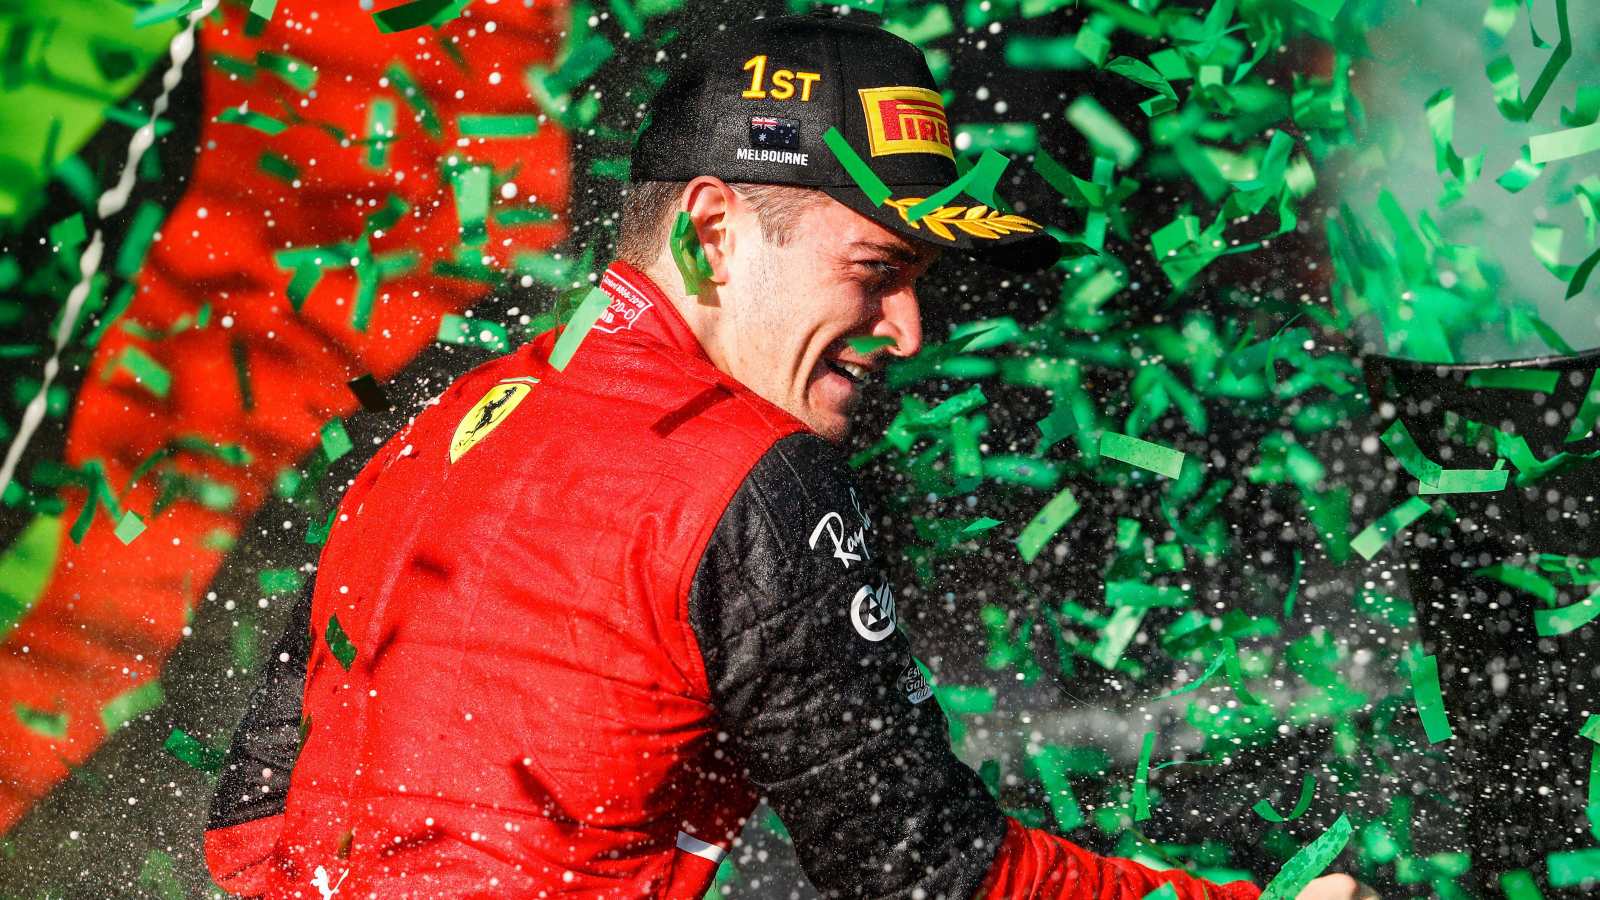 Charles Leclerc sprays champagne on the podium. Melbourne, April 2022.